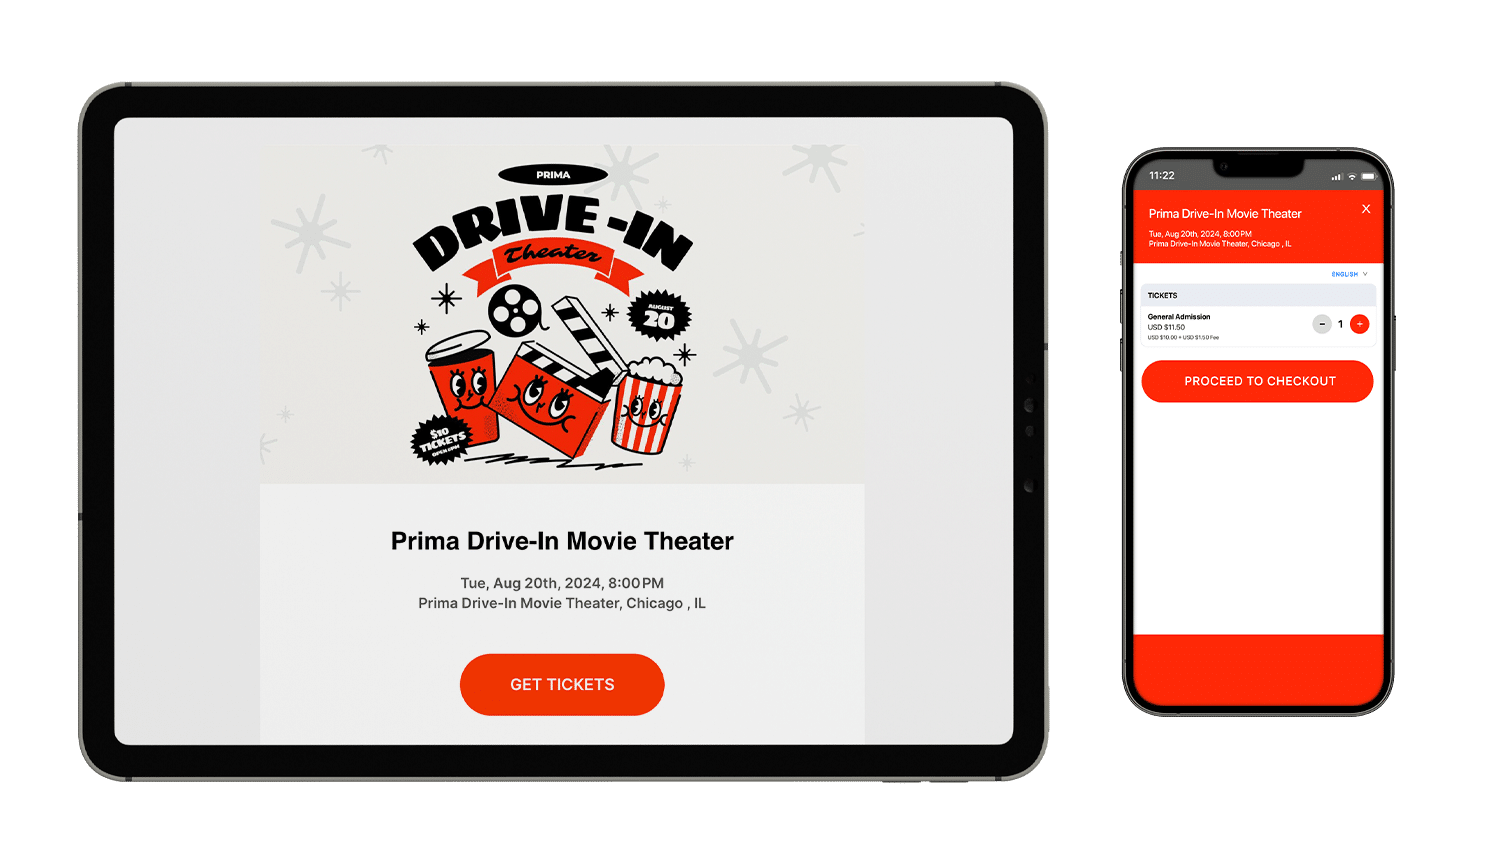 An event mockup of Prima Drive-In Movie Theater on a tablet and mobile phone